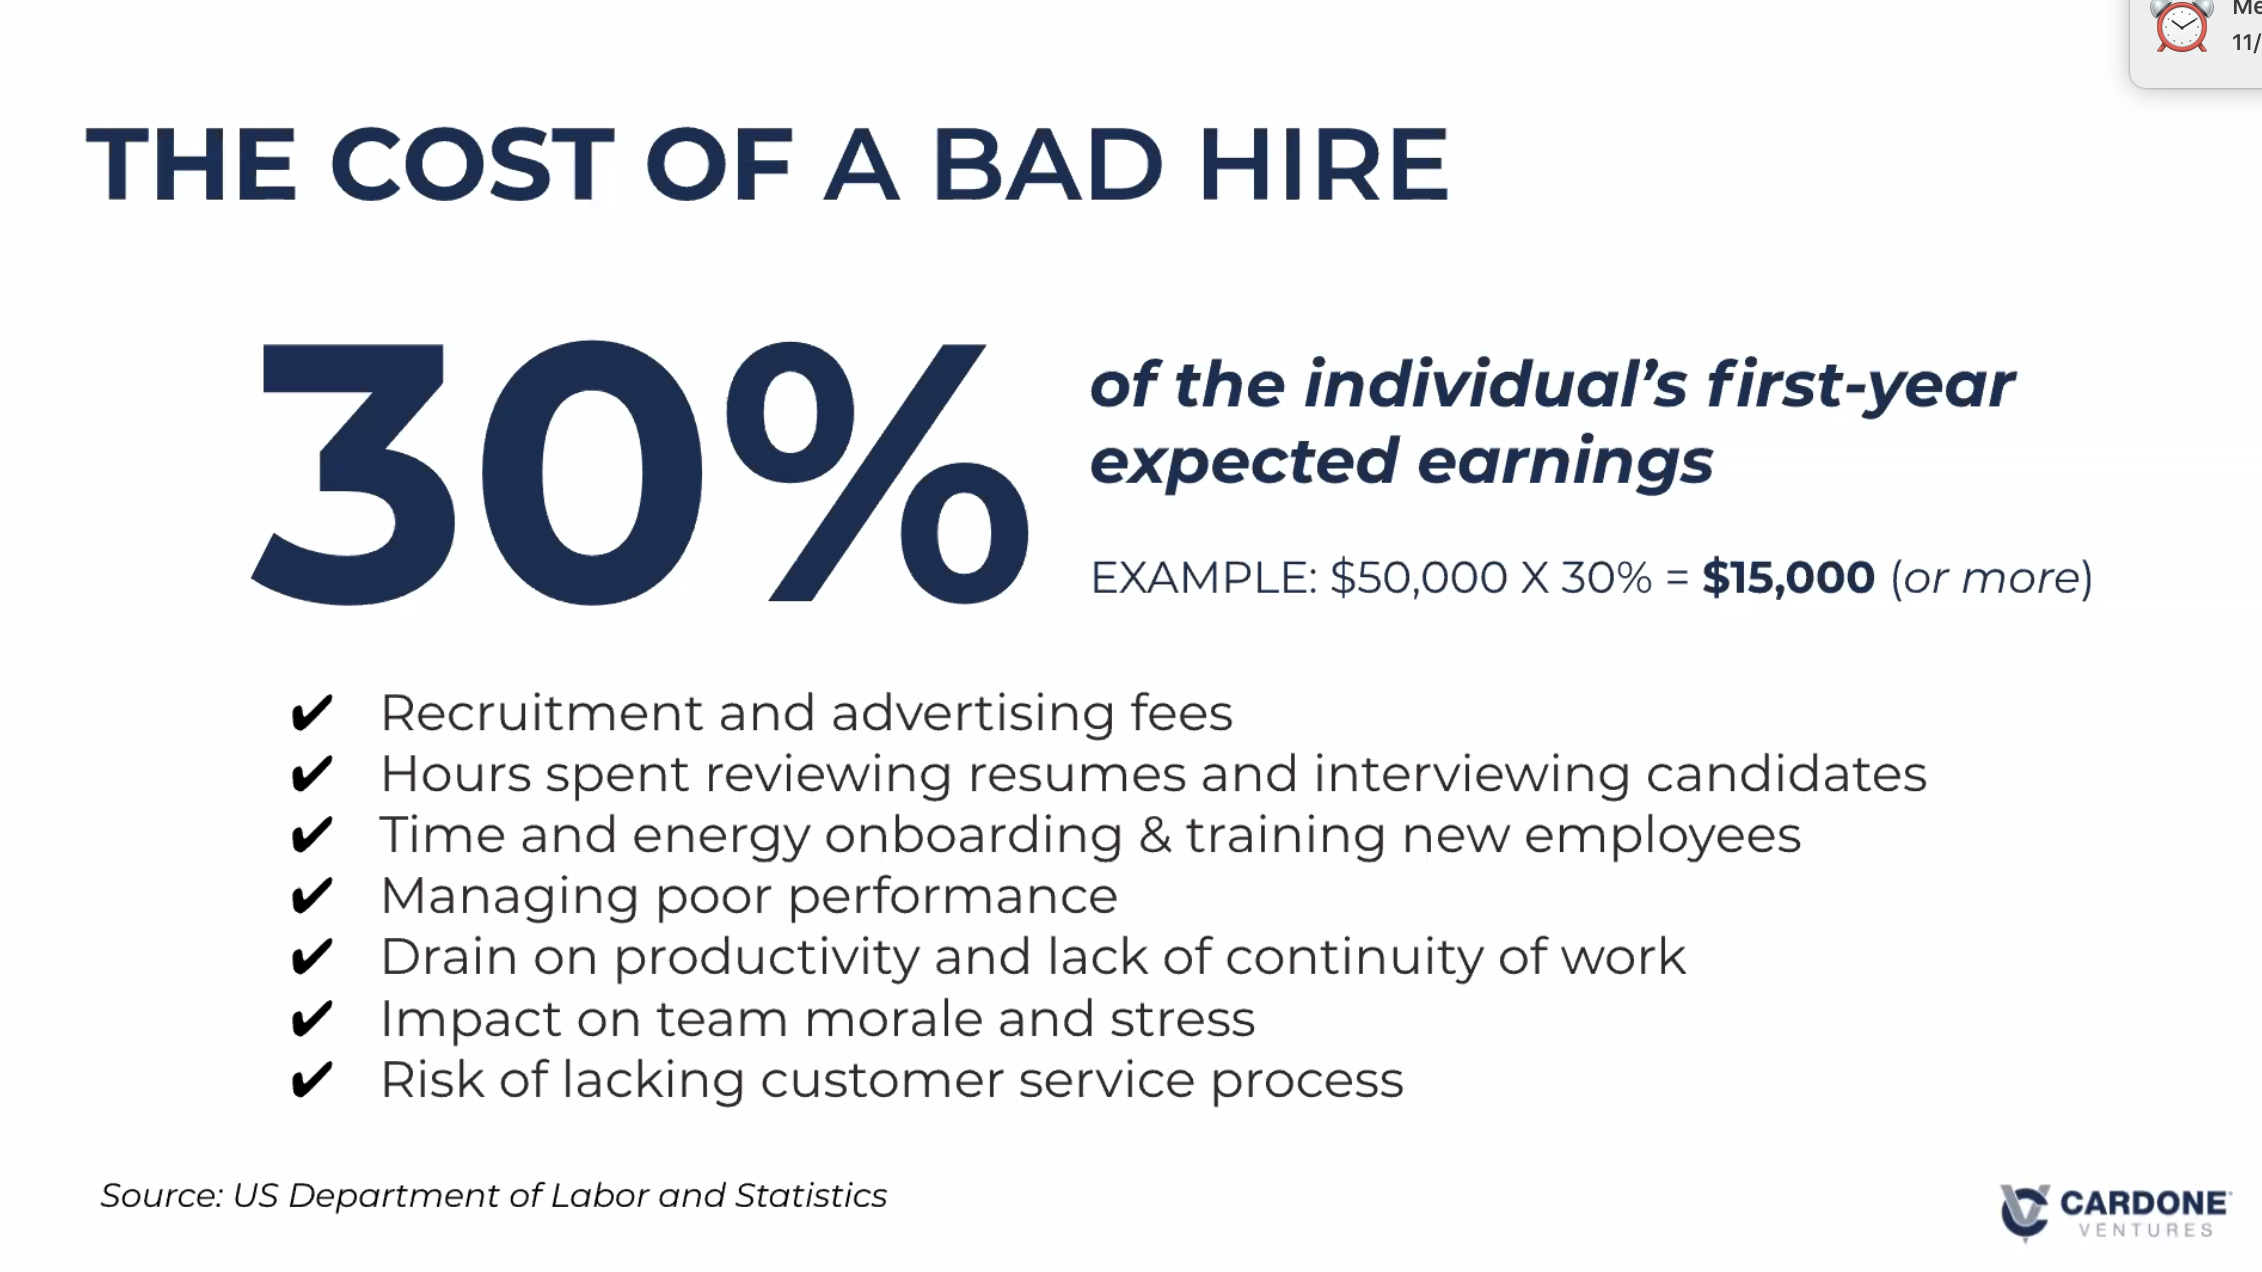 The Cost of a Bad Hire is $15000 or more!